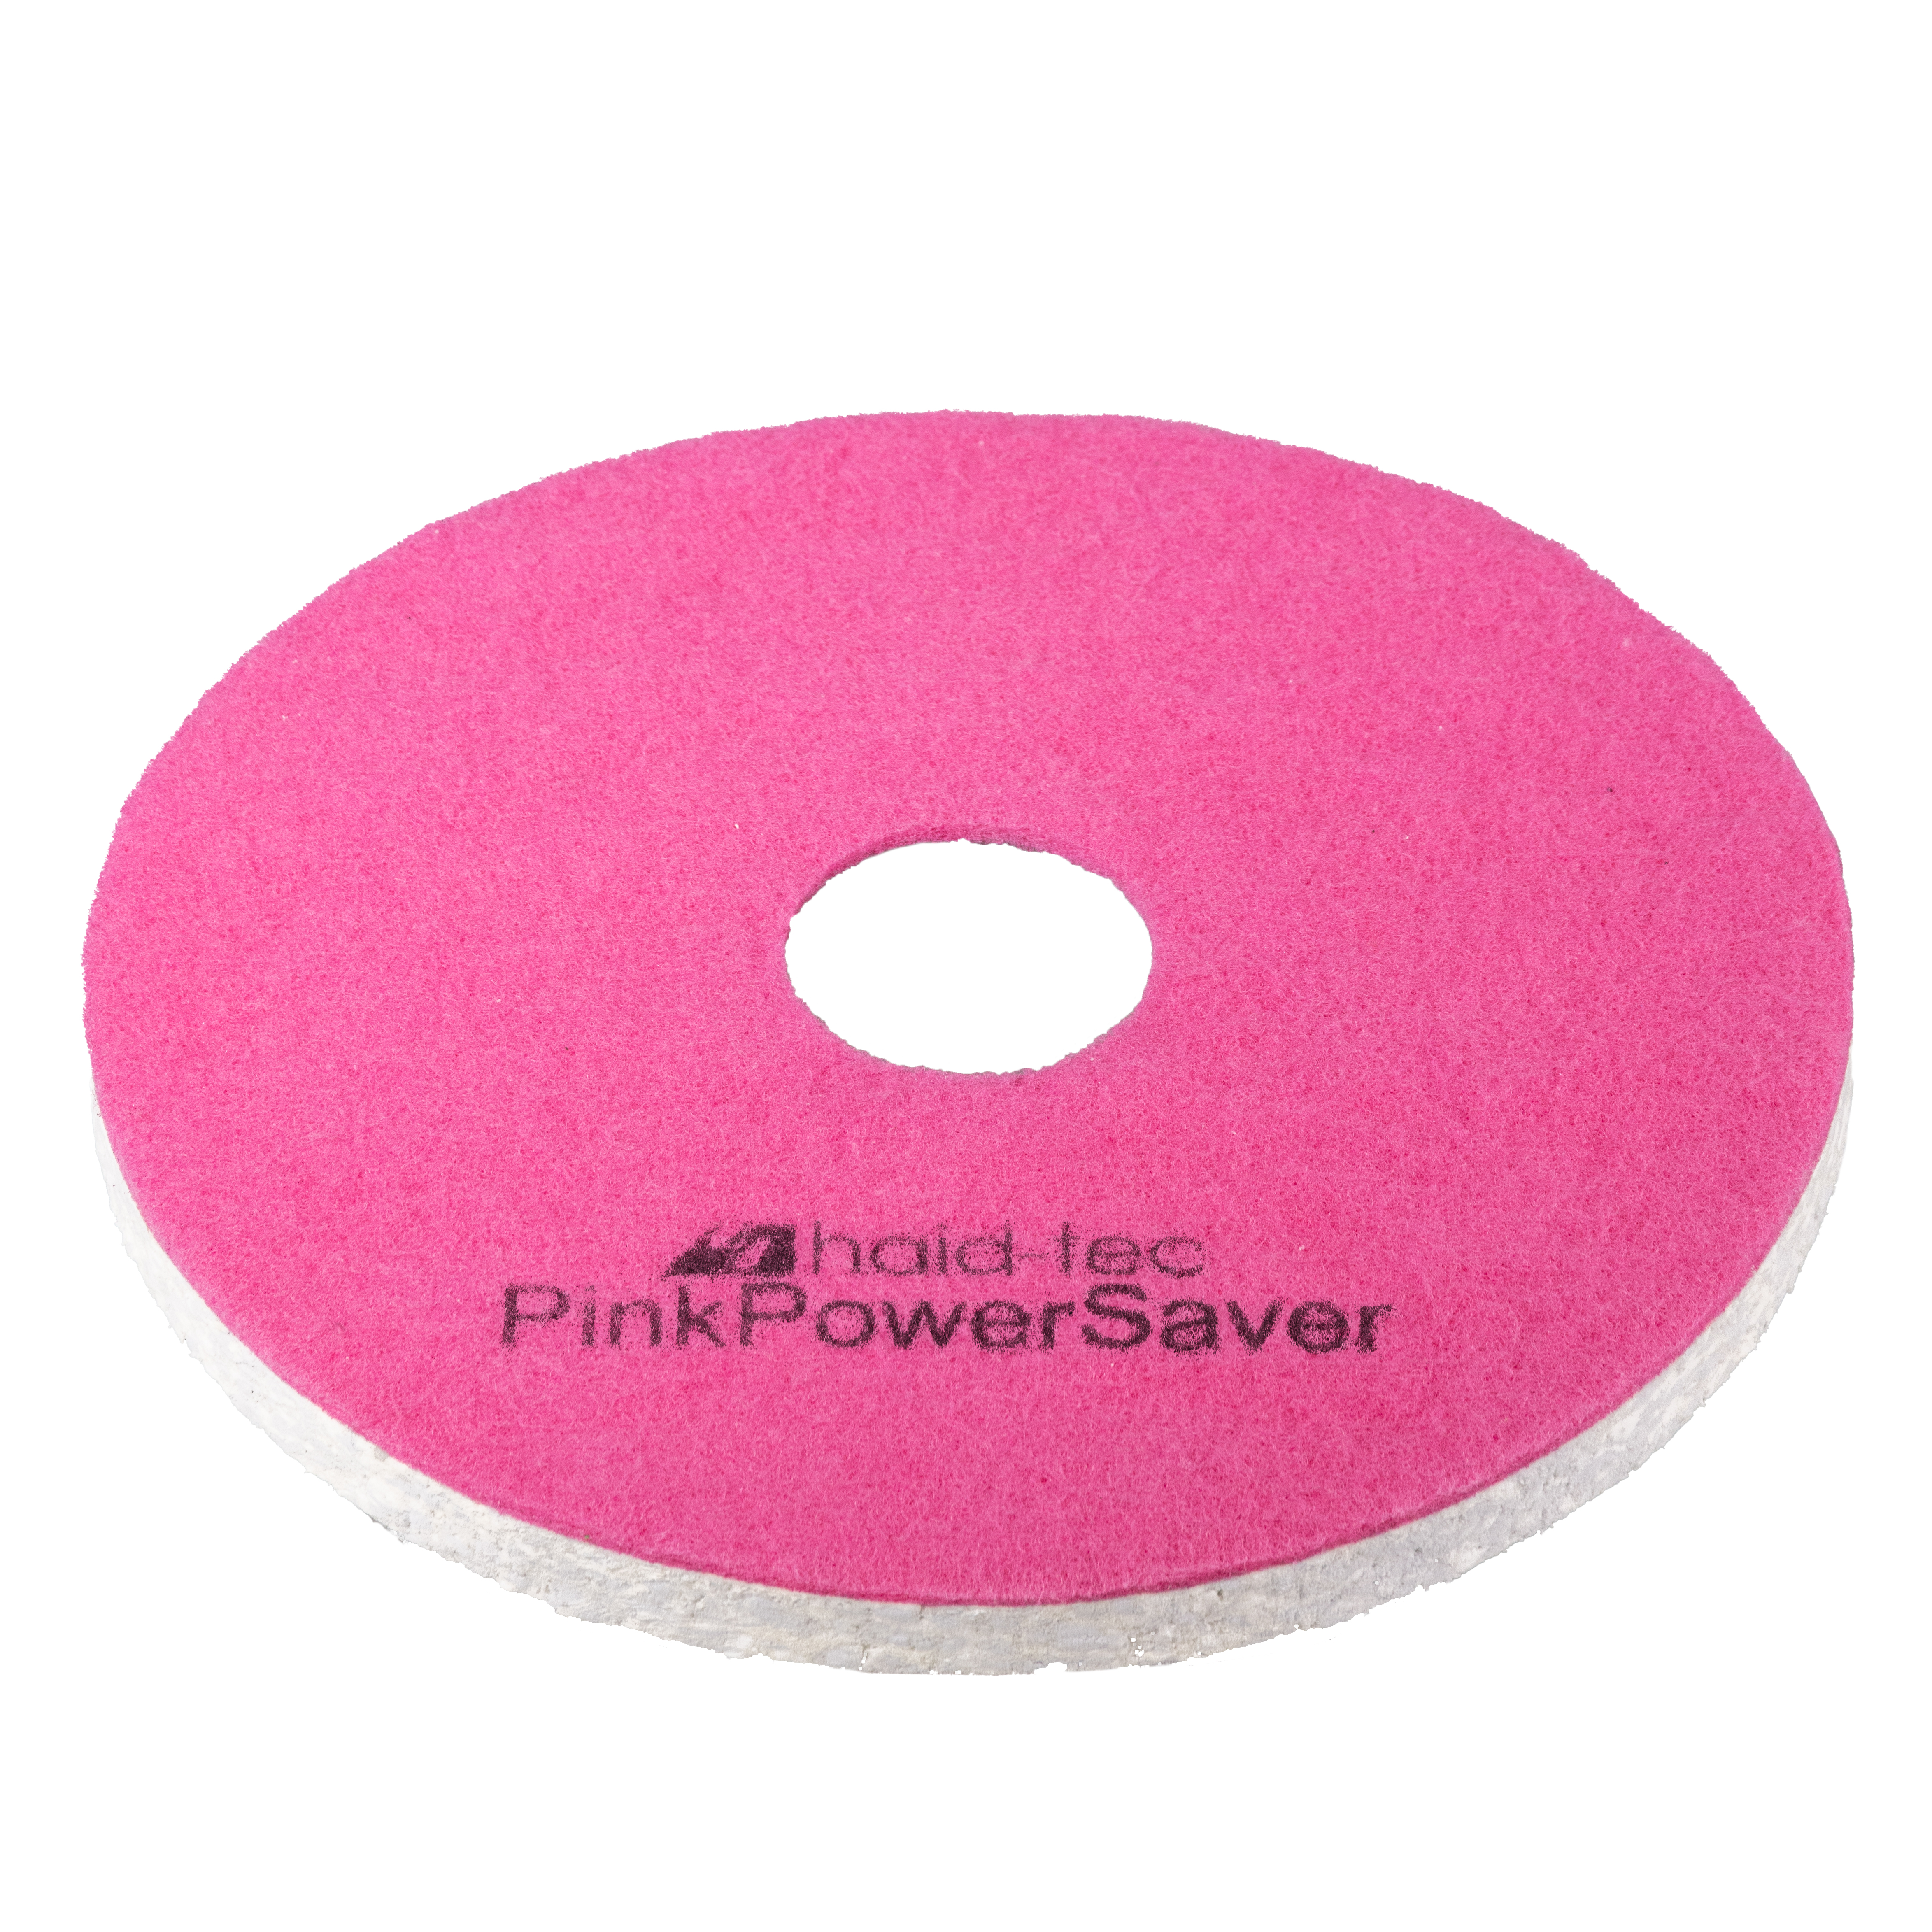 PinkPowerSaver Pad 6.5inch/165mm for i-mop Lite, pad for compact scrubber dryer - melamine pad for intensive and maintenance cleaning